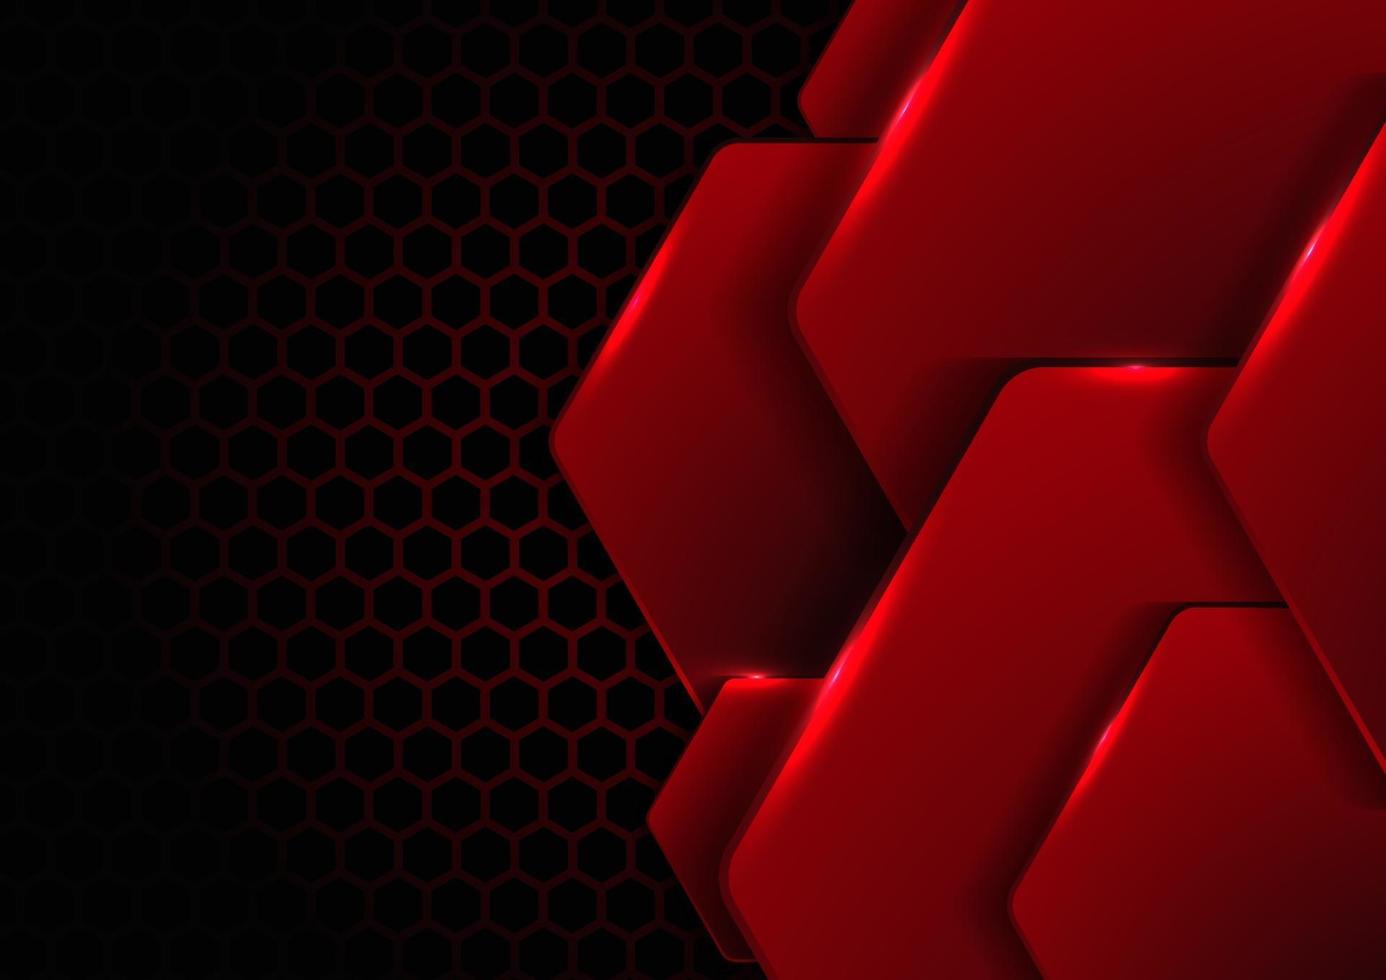 Abstract black and red metallic hexagon with lighting on hexagons texture pattern technology innovation concept background vector